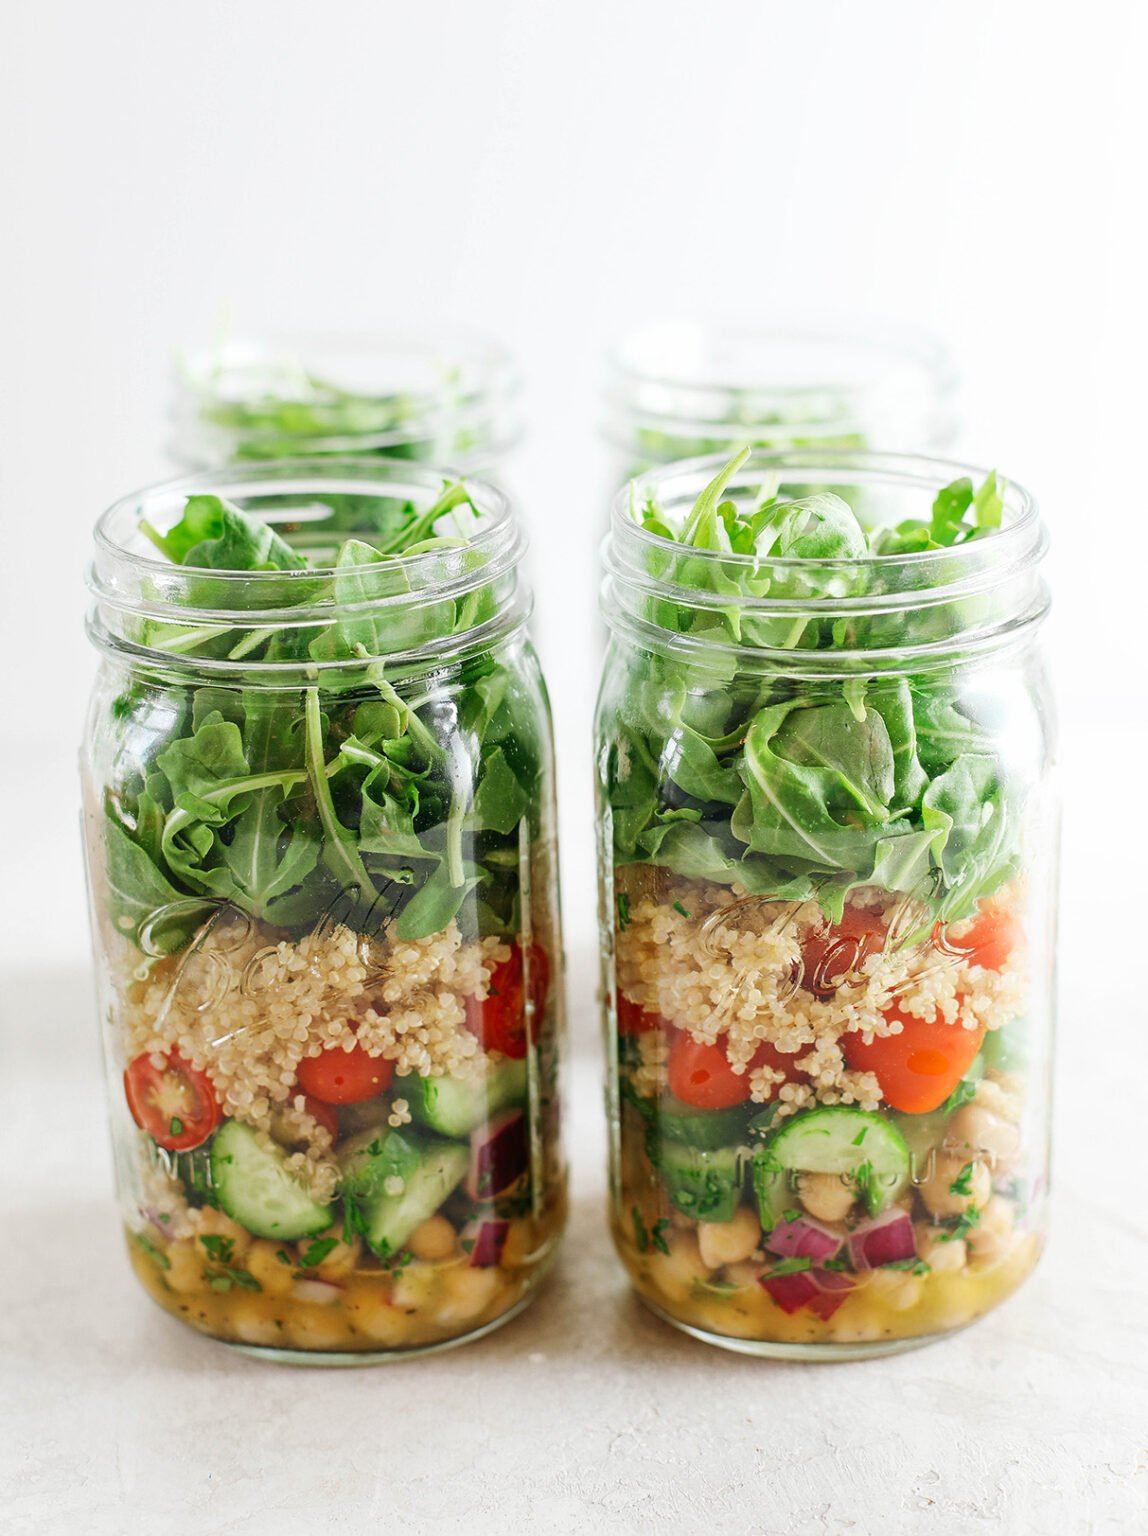 Marinated Cucumber Tomato Salad in a jar! So easy layer chopped